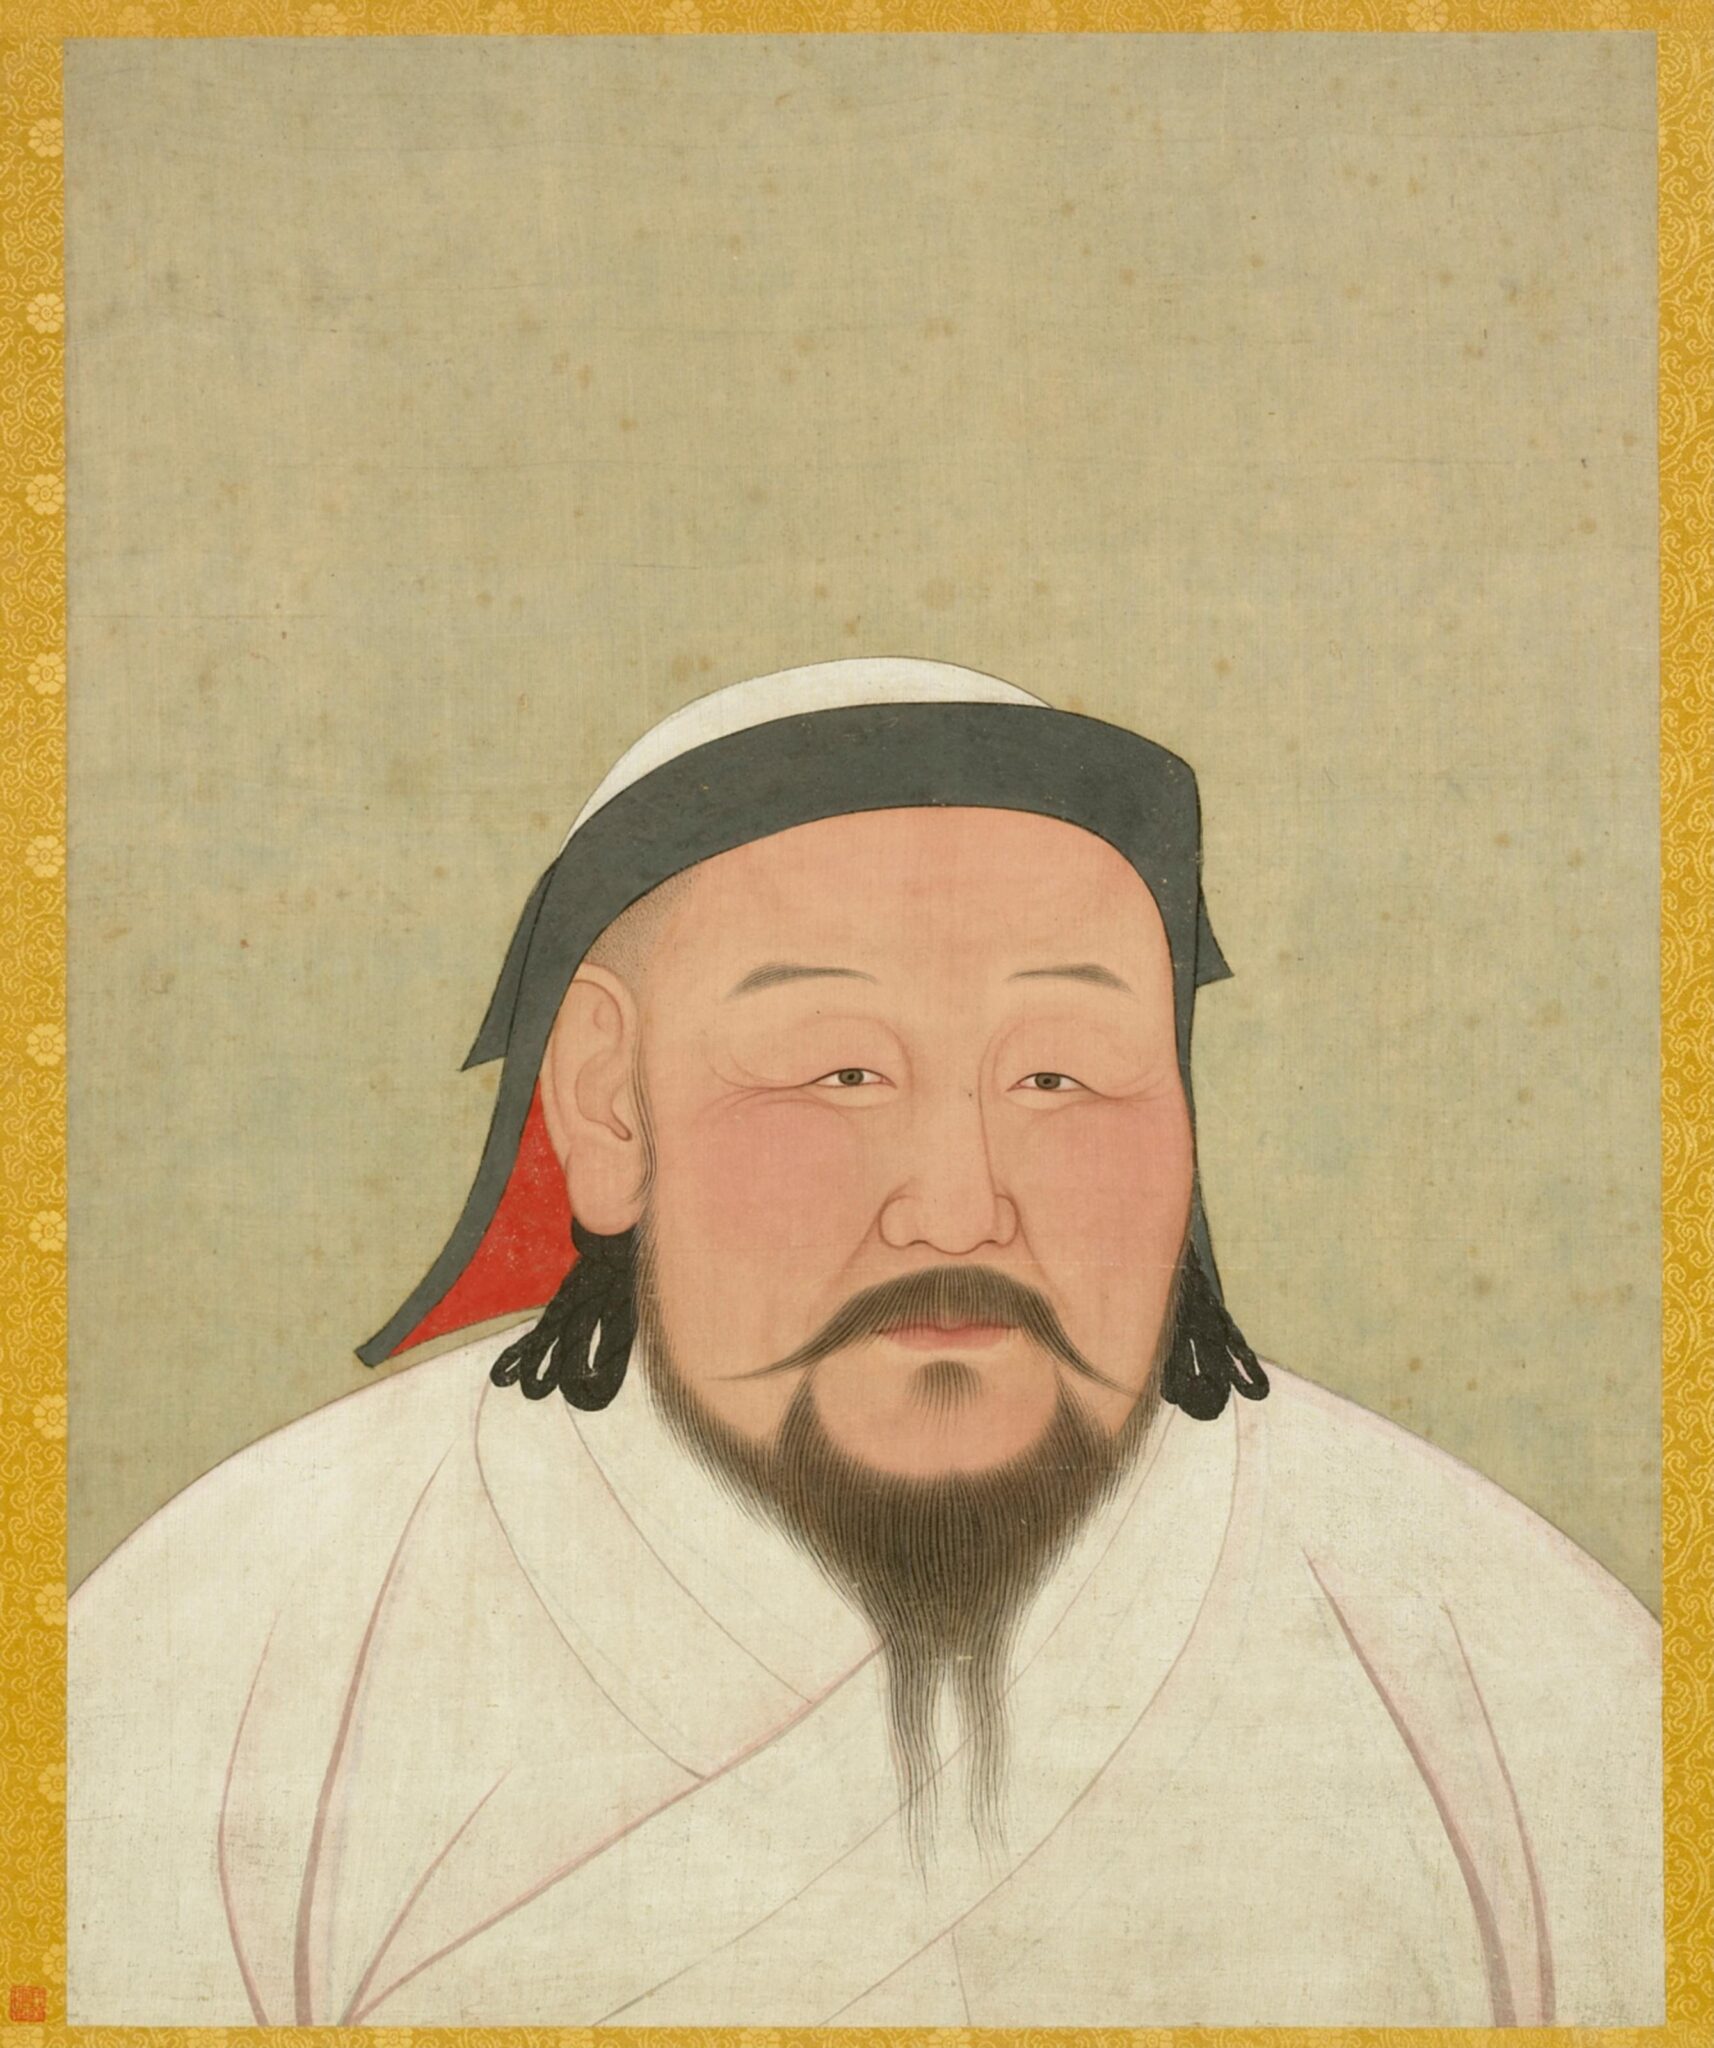 Three-quarter portrait of bearded man; framed and separated by yellow border